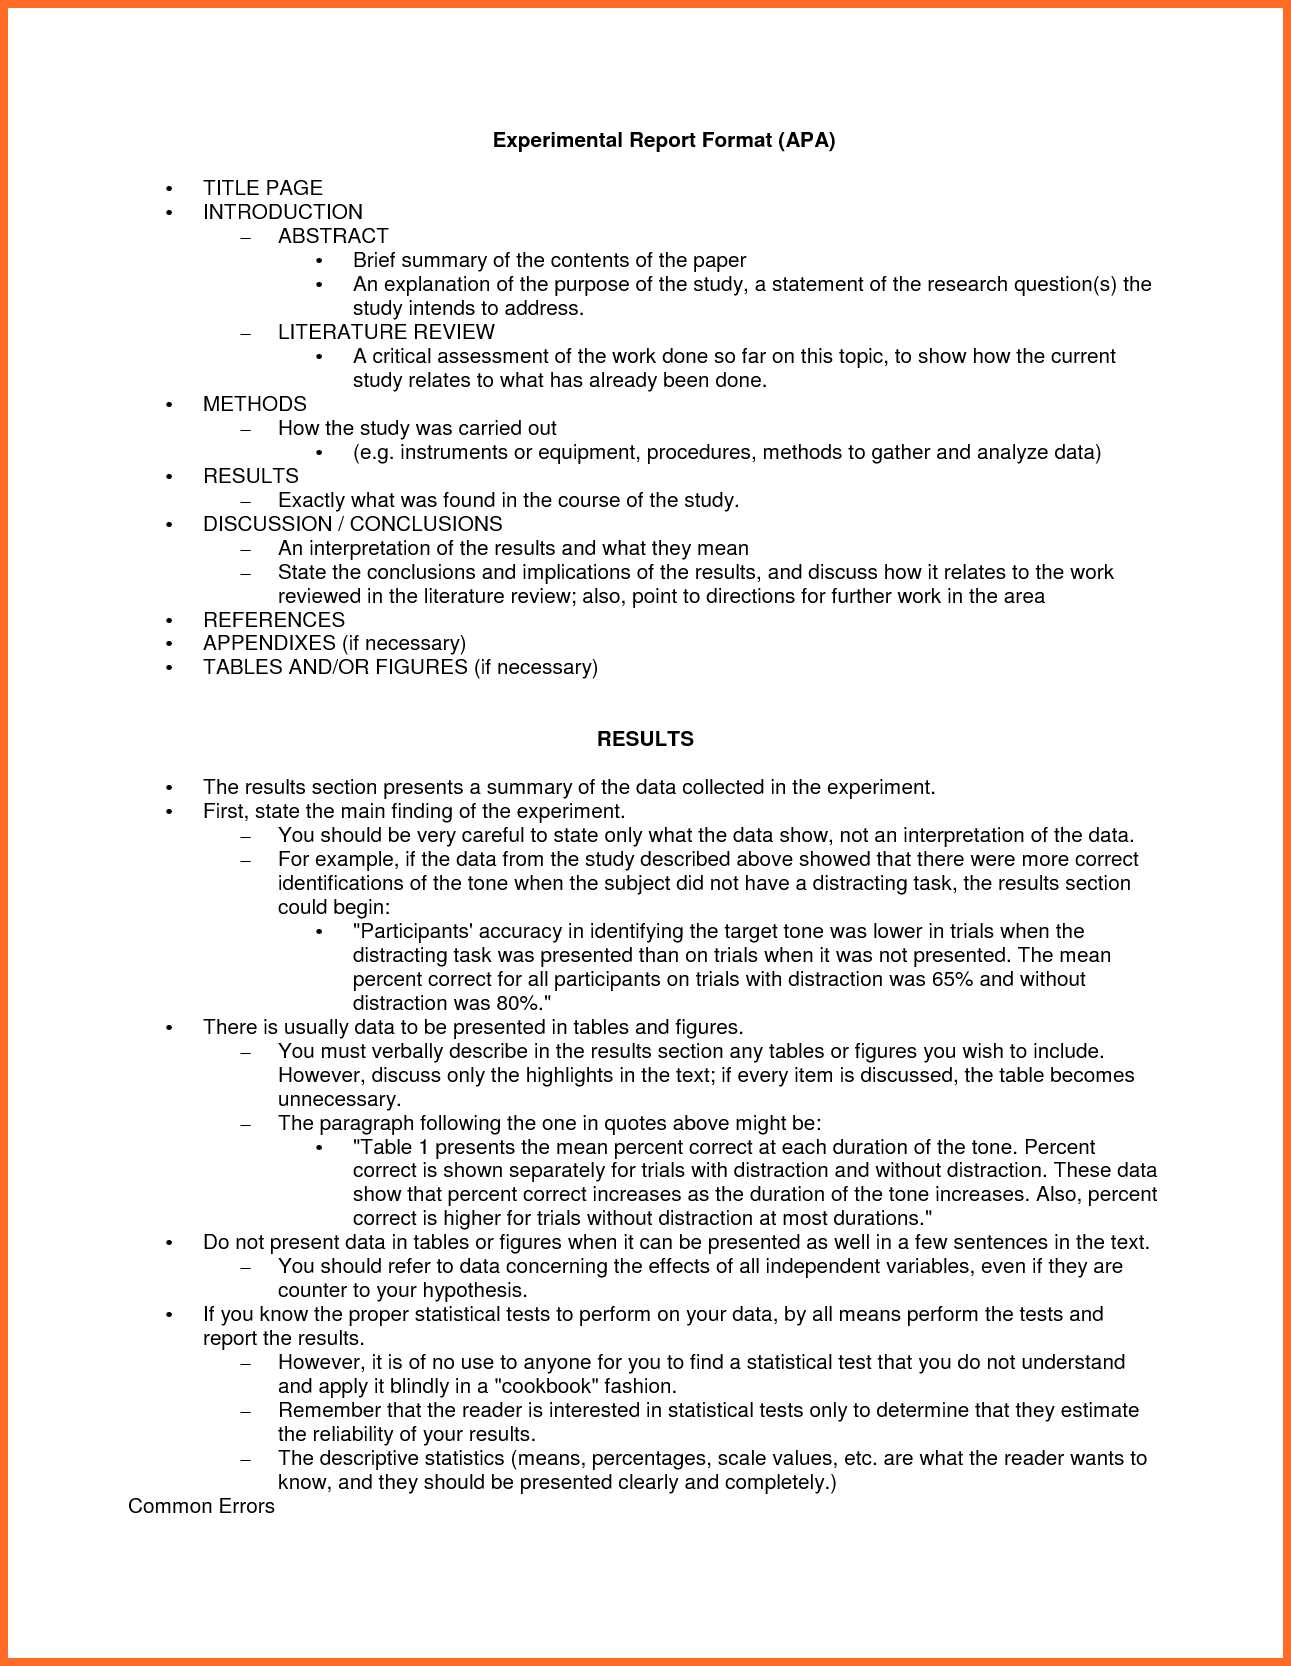 Apa Research Paper Template Word - Dalep.midnightpig.co Inside Apa Research Paper Template Word 2010